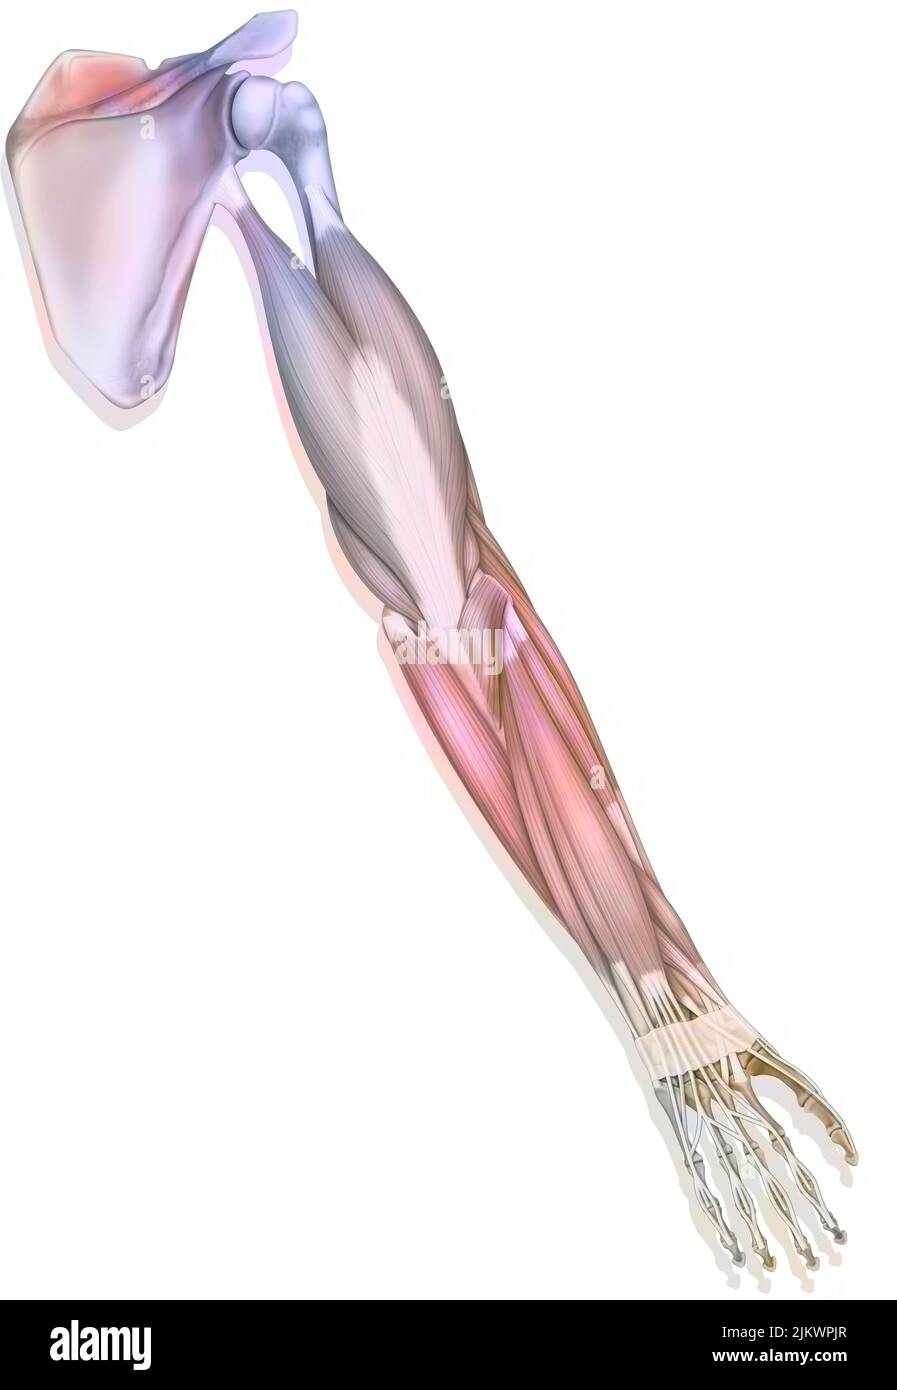 The muscles of the upper right limb in posterior view. Stock Photo